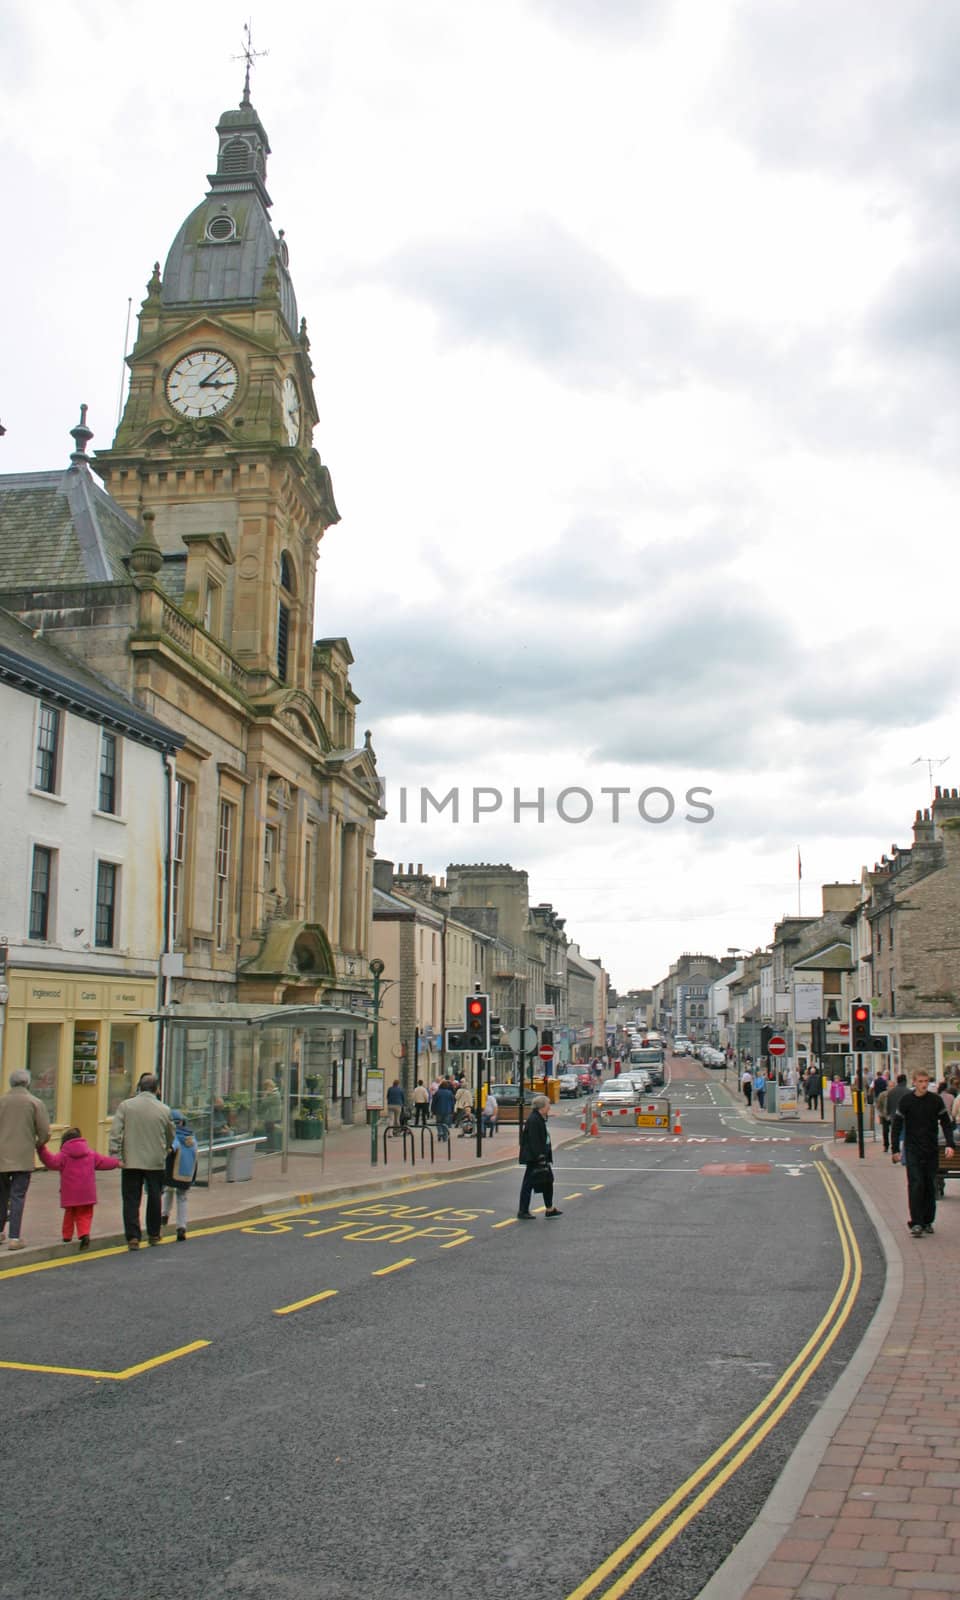 Shoppers and Tourists in Kendal UK by green308